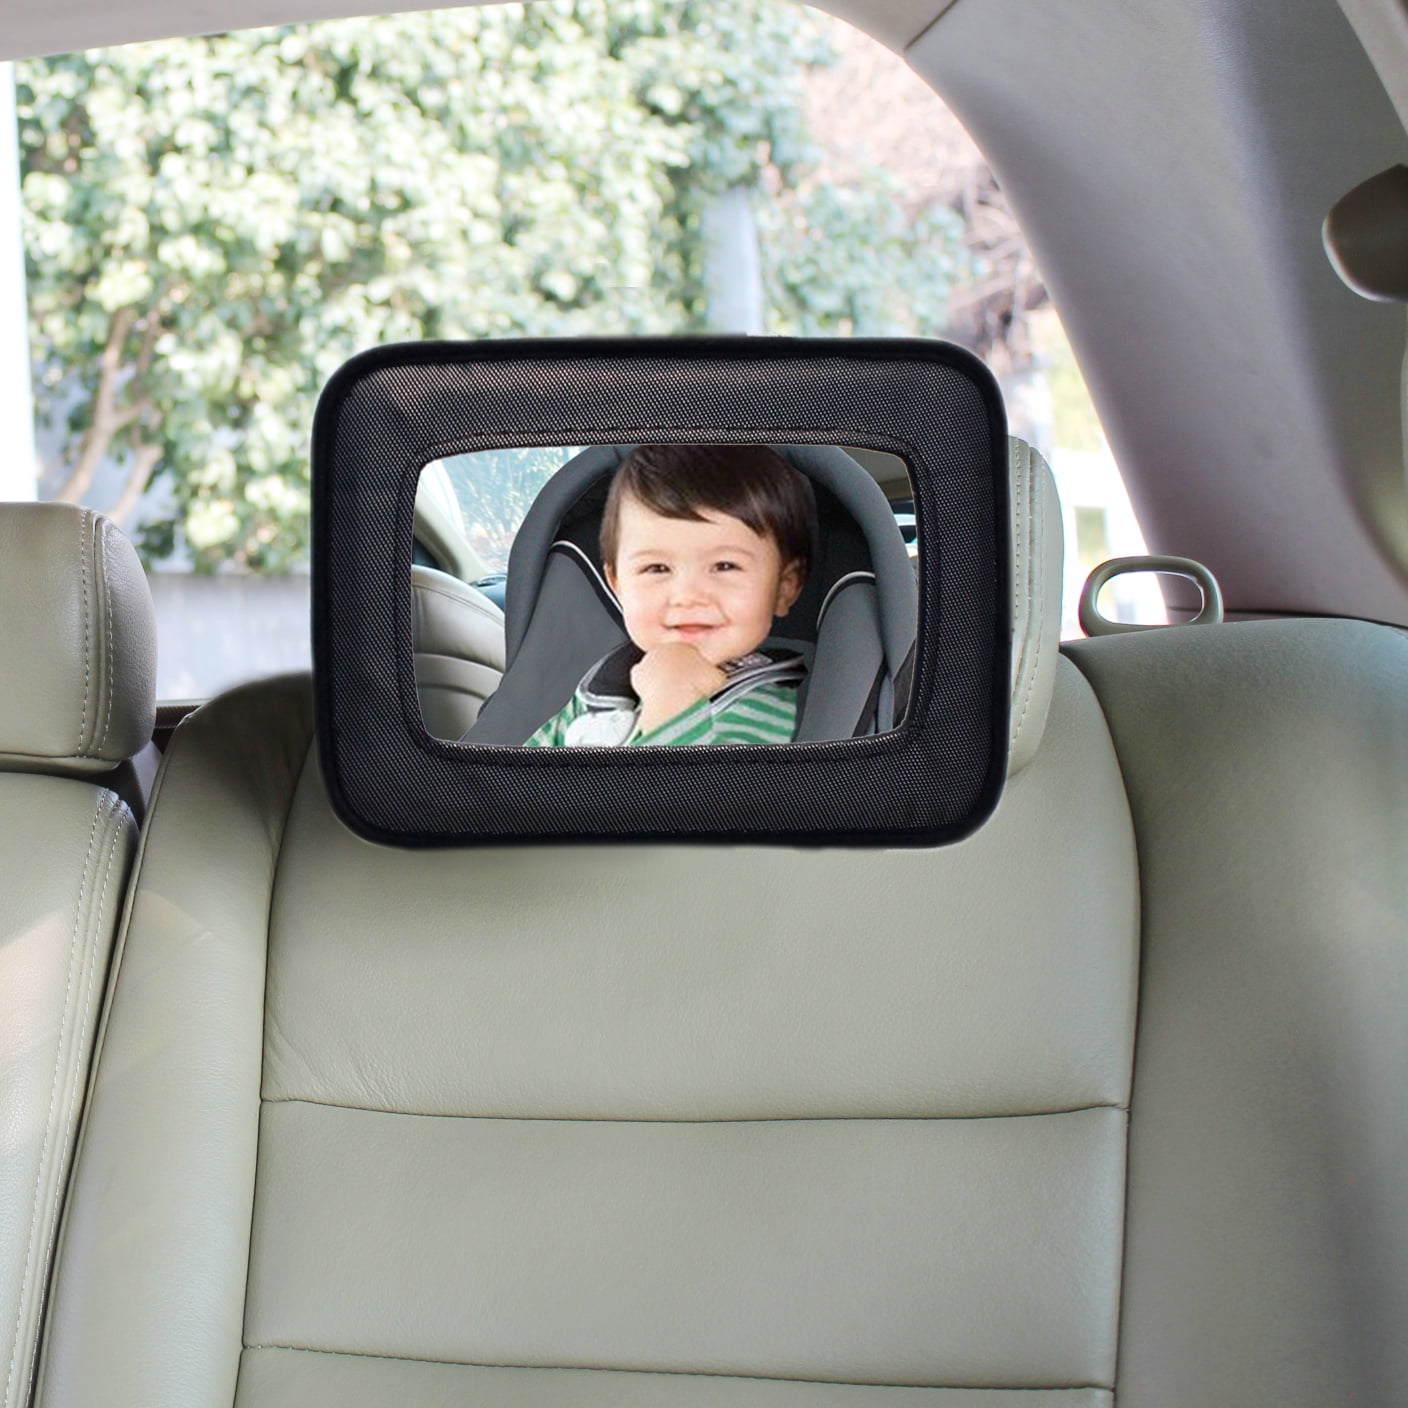 Black Jeep Back Seat Baby View Mirror